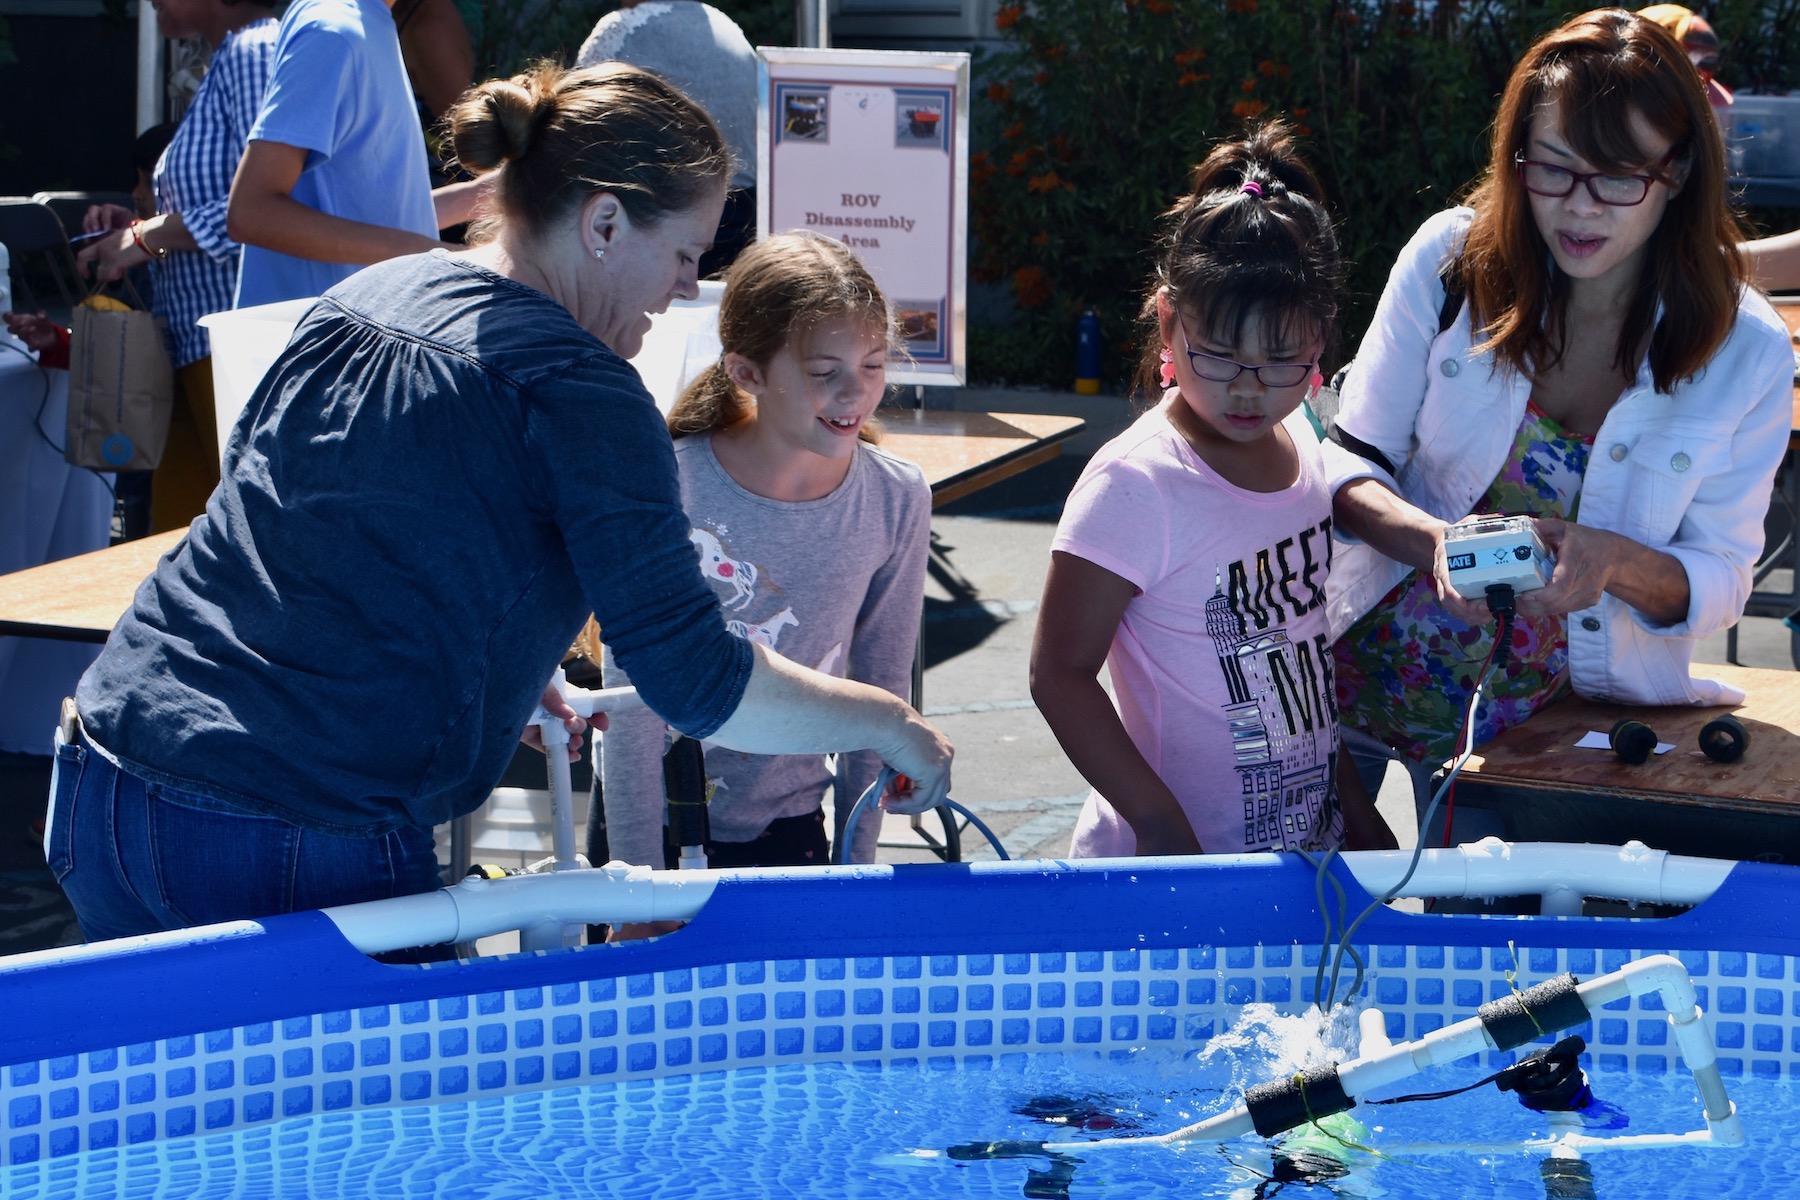 2019 Open House Build Your Own ROV Families Dave Caress 1800